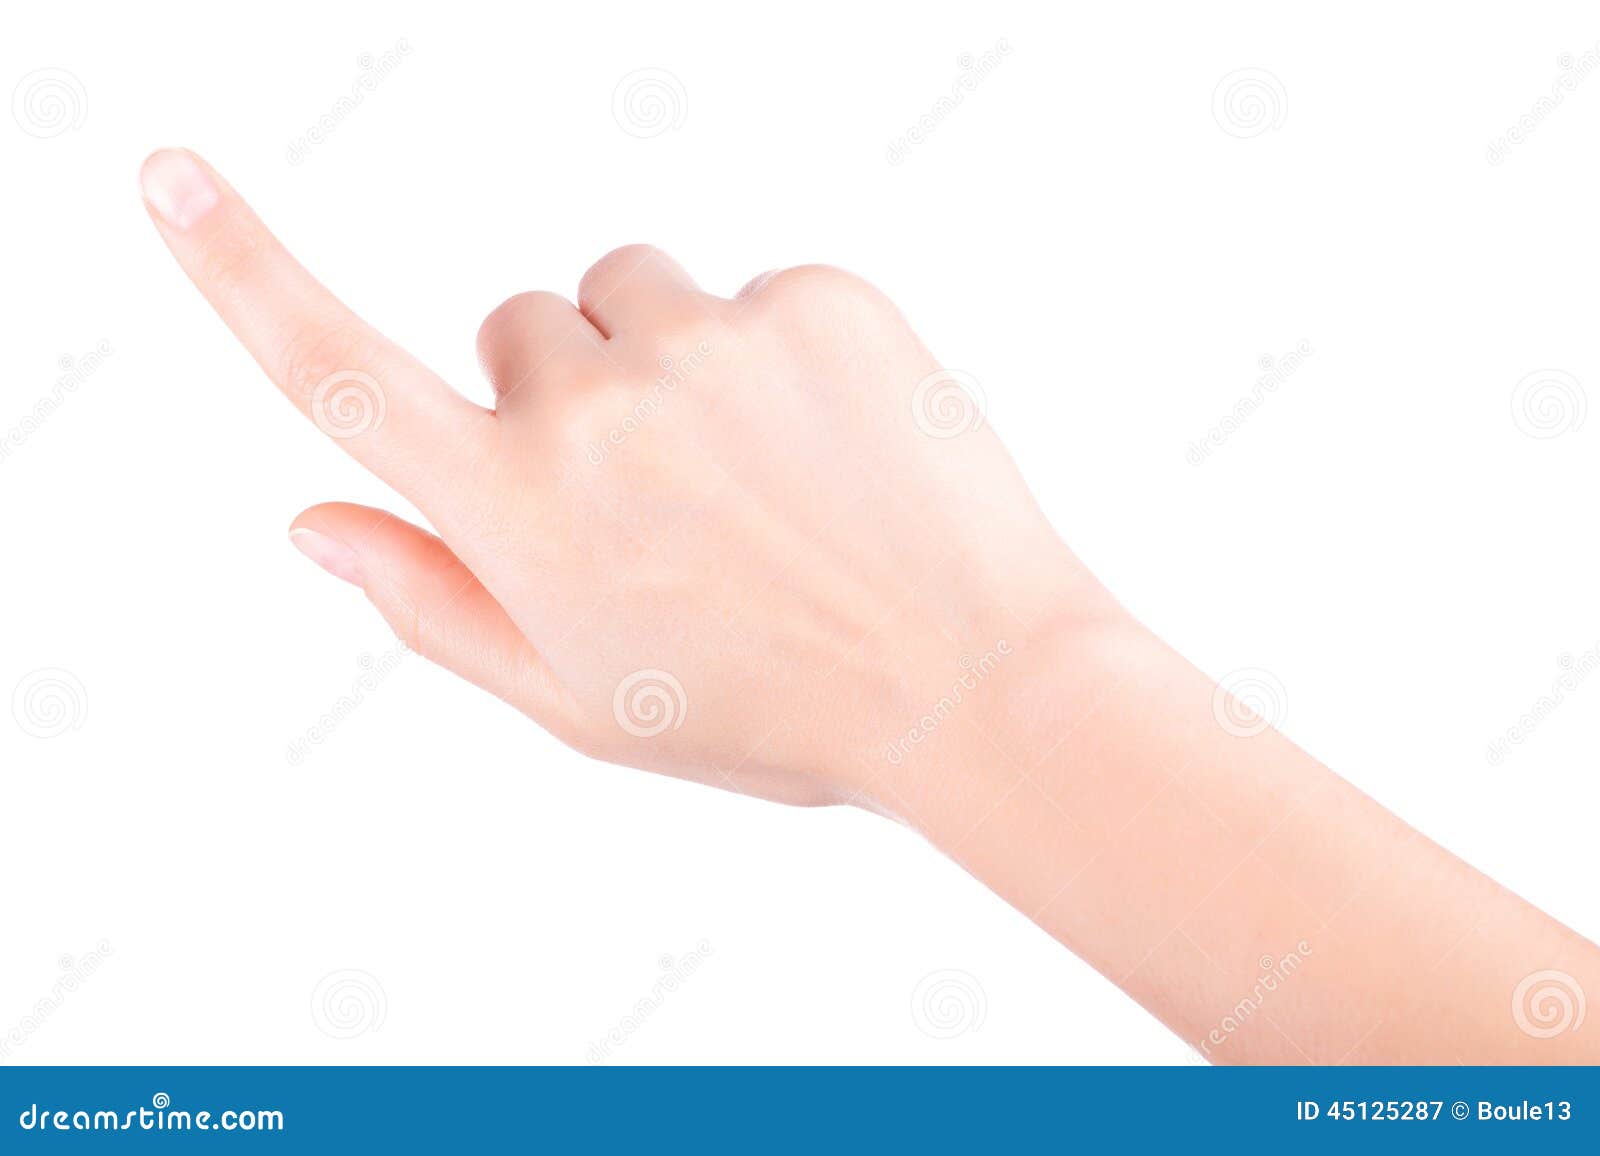 woman-s-finger-pointing-touching-image-isolated-white-background-45125287.jpg